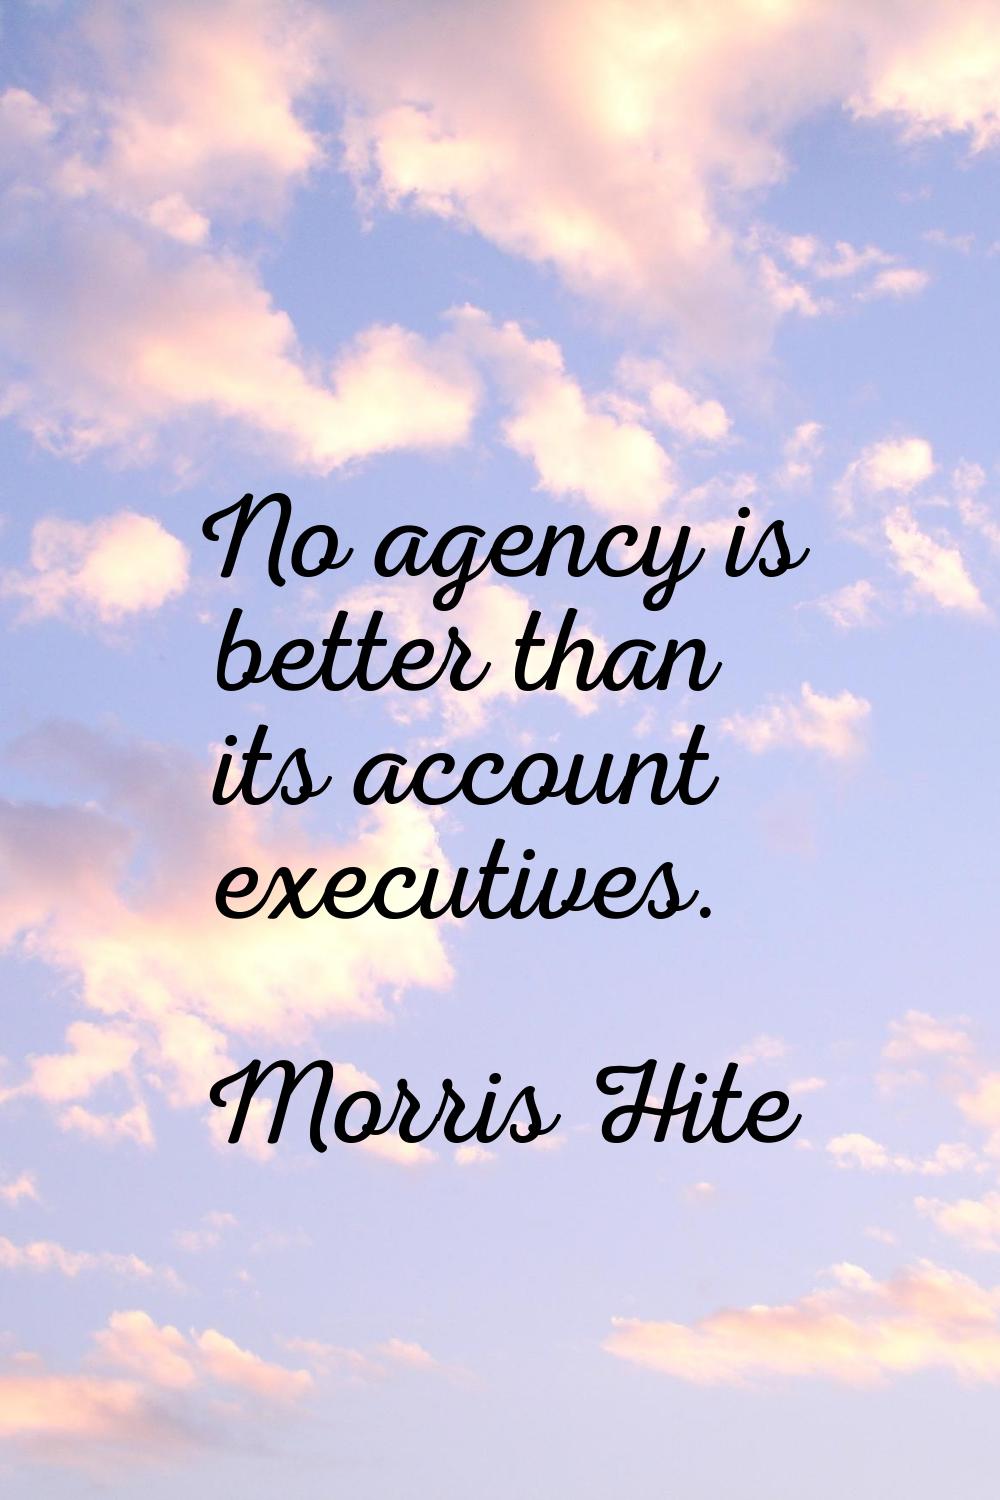 No agency is better than its account executives.